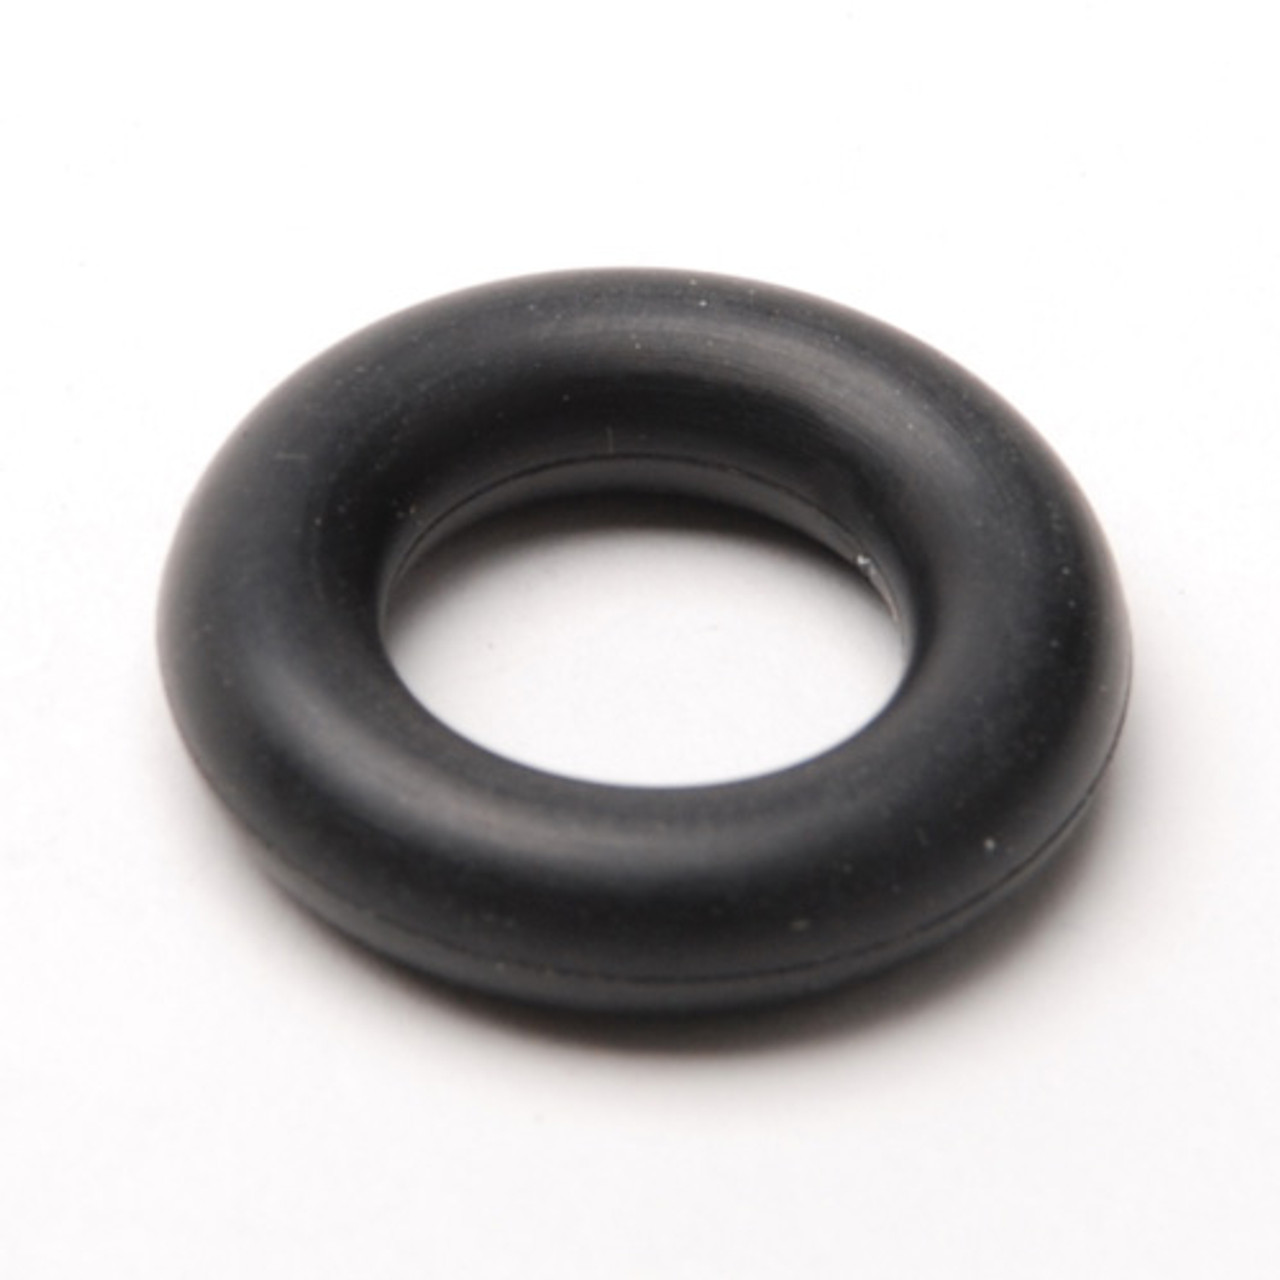 Amazon.com: WYanHua-Gasket O Ring, 100pcs Flat Rubber Seal O-Ring Hose  Gasket, for Faucet Grommet, Rubber Washer Lot, Made (Color : 9MM) :  Industrial & Scientific